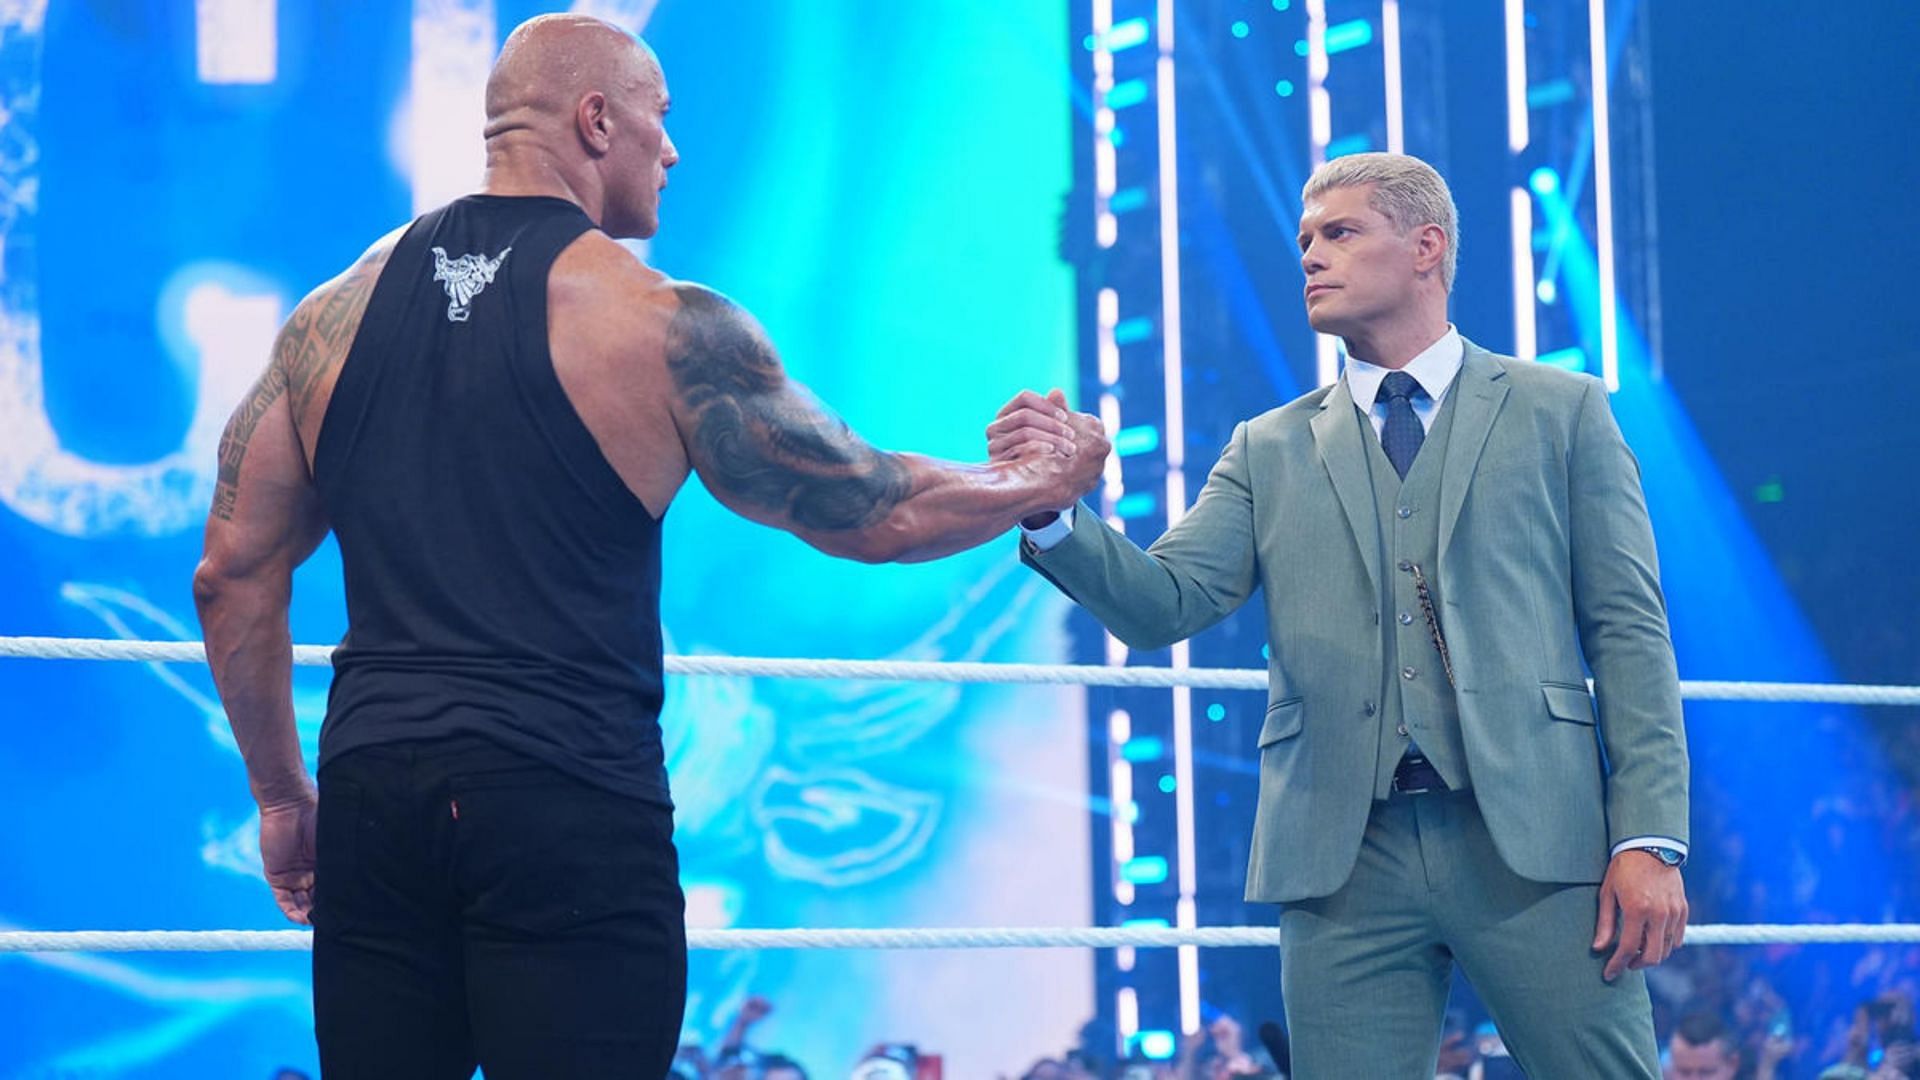 The Rock with current Undisputed WWE Champion Cody Rhodes